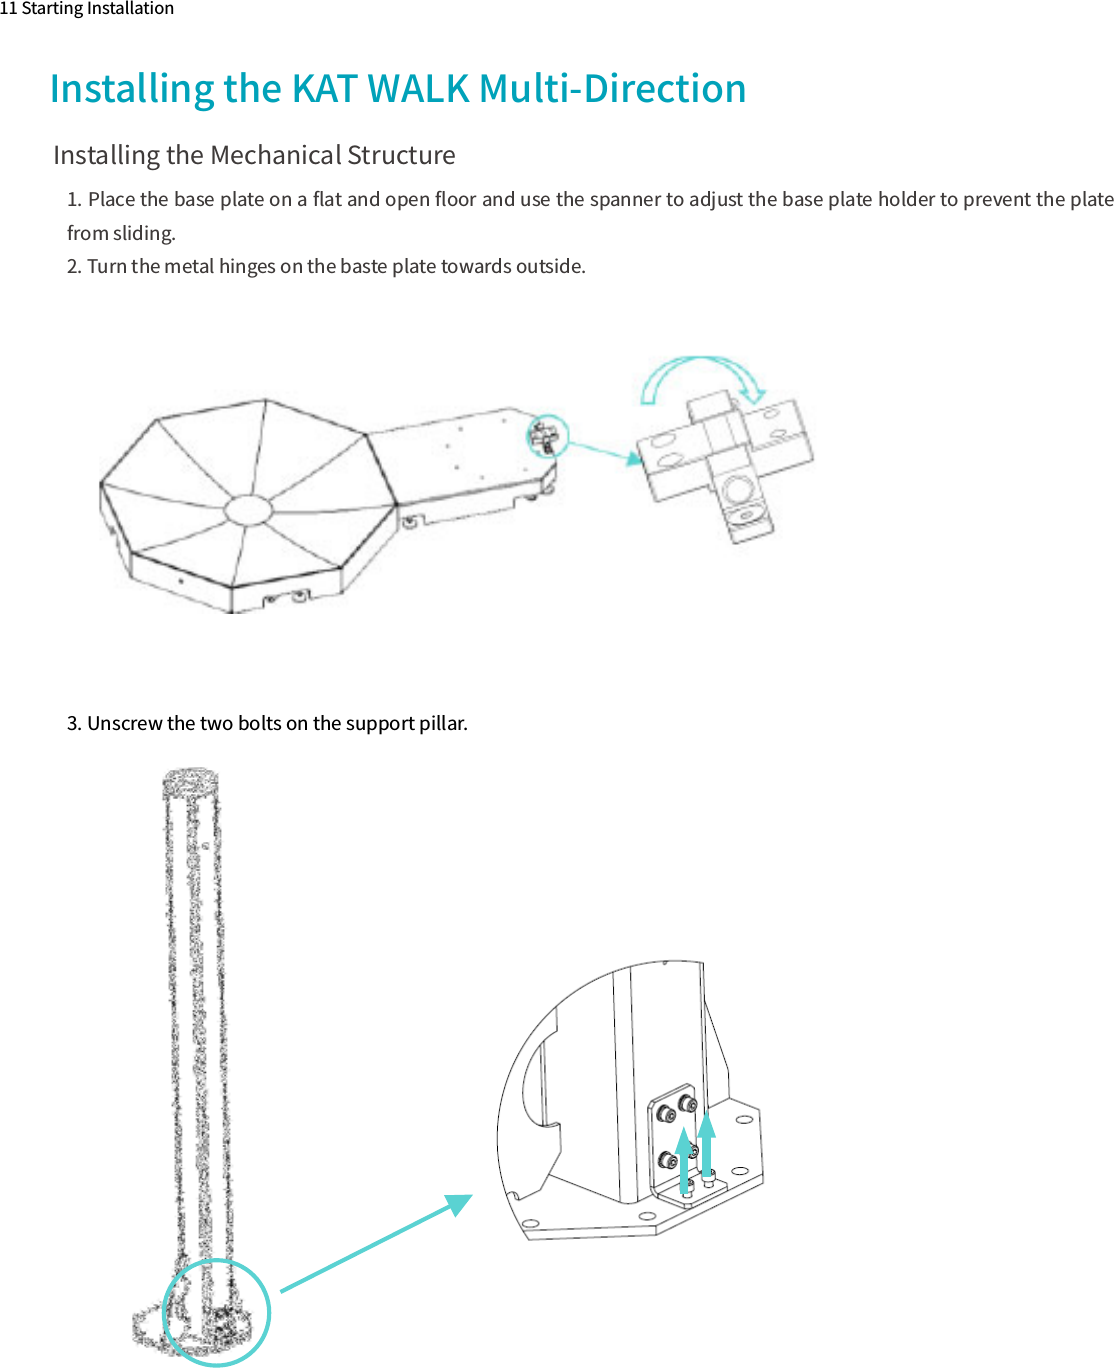 1. Place the base plate on a ﬂat and open ﬂoor and use the spanner to adjust the base plate holder to prevent the plate from sliding.2. Turn the metal hinges on the baste plate towards outside.11 Starting InstallationInstalling the KAT WALK Multi-Direction Installing the Mechanical Structure3. Unscrew the two bolts on the support pillar.